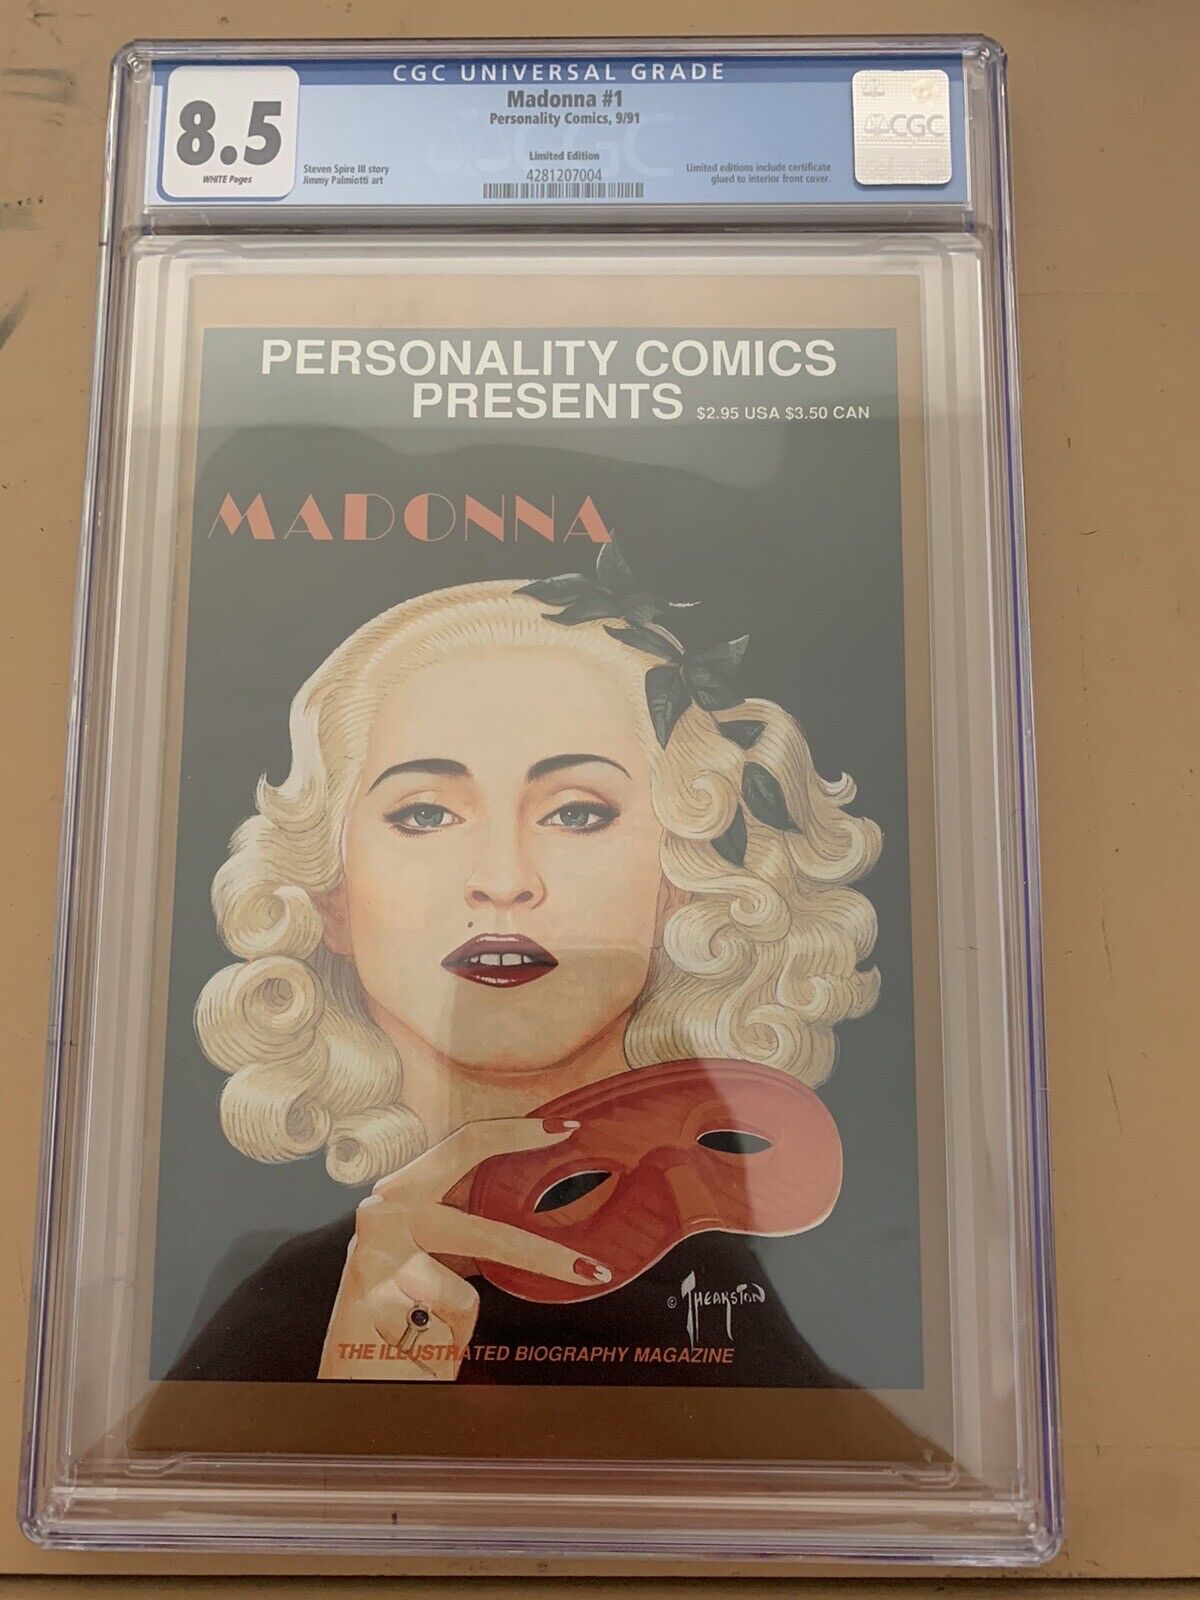 Personality Comics Presents Madonna #1 CGC Graded 8.5  Limited Edition 564/2000